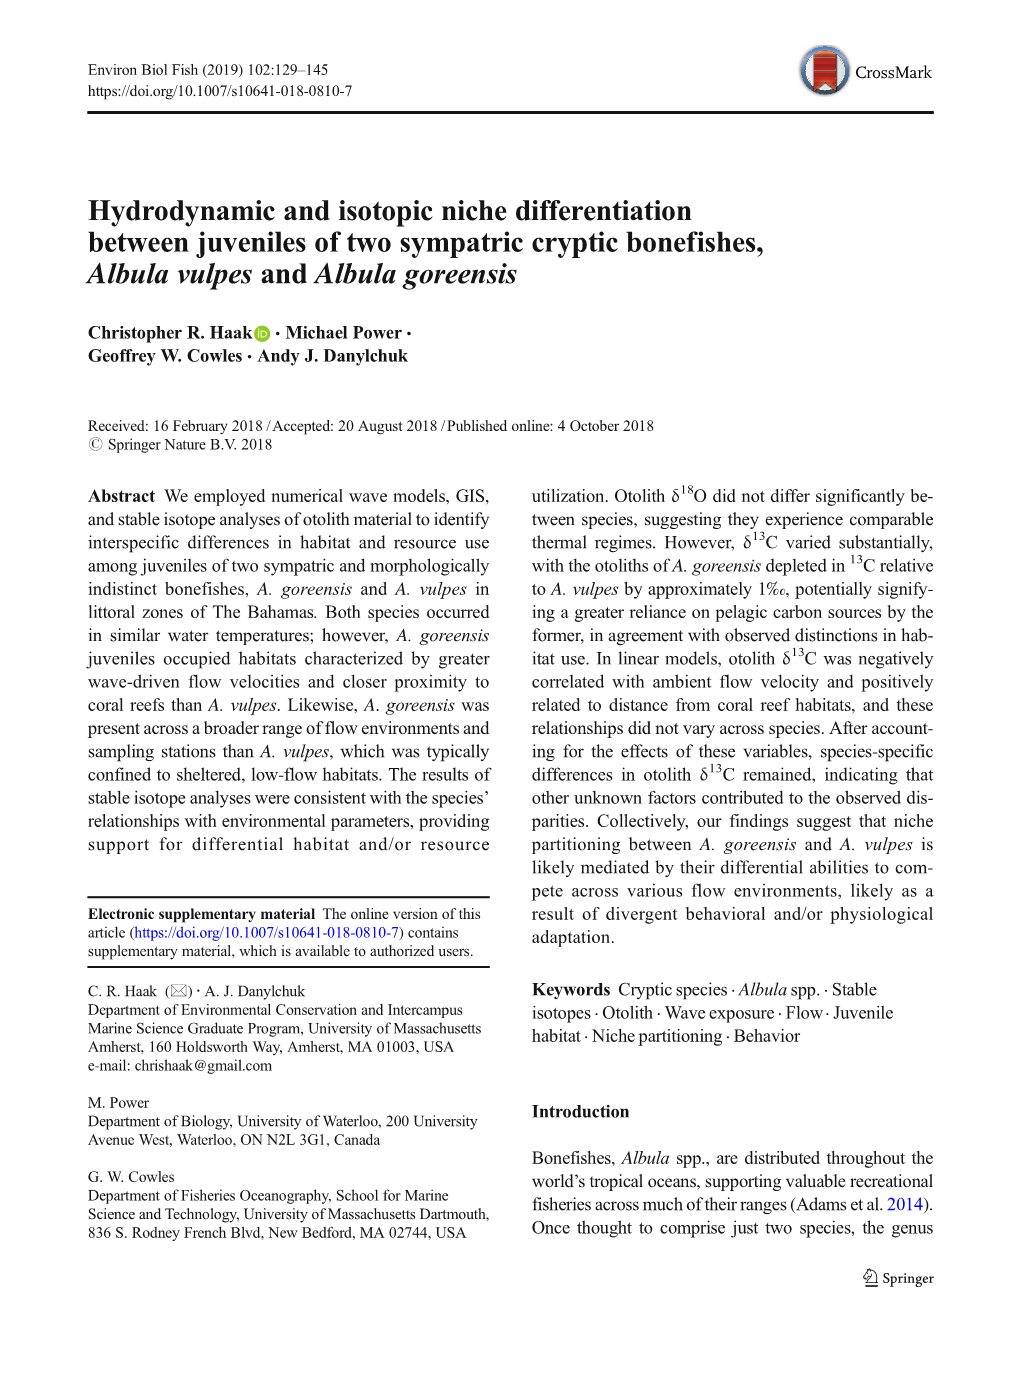 Hydrodynamic and Isotopic Niche Differentiation Between Juveniles of Two Sympatric Cryptic Bonefishes, Albula Vulpes and Albula Goreensis